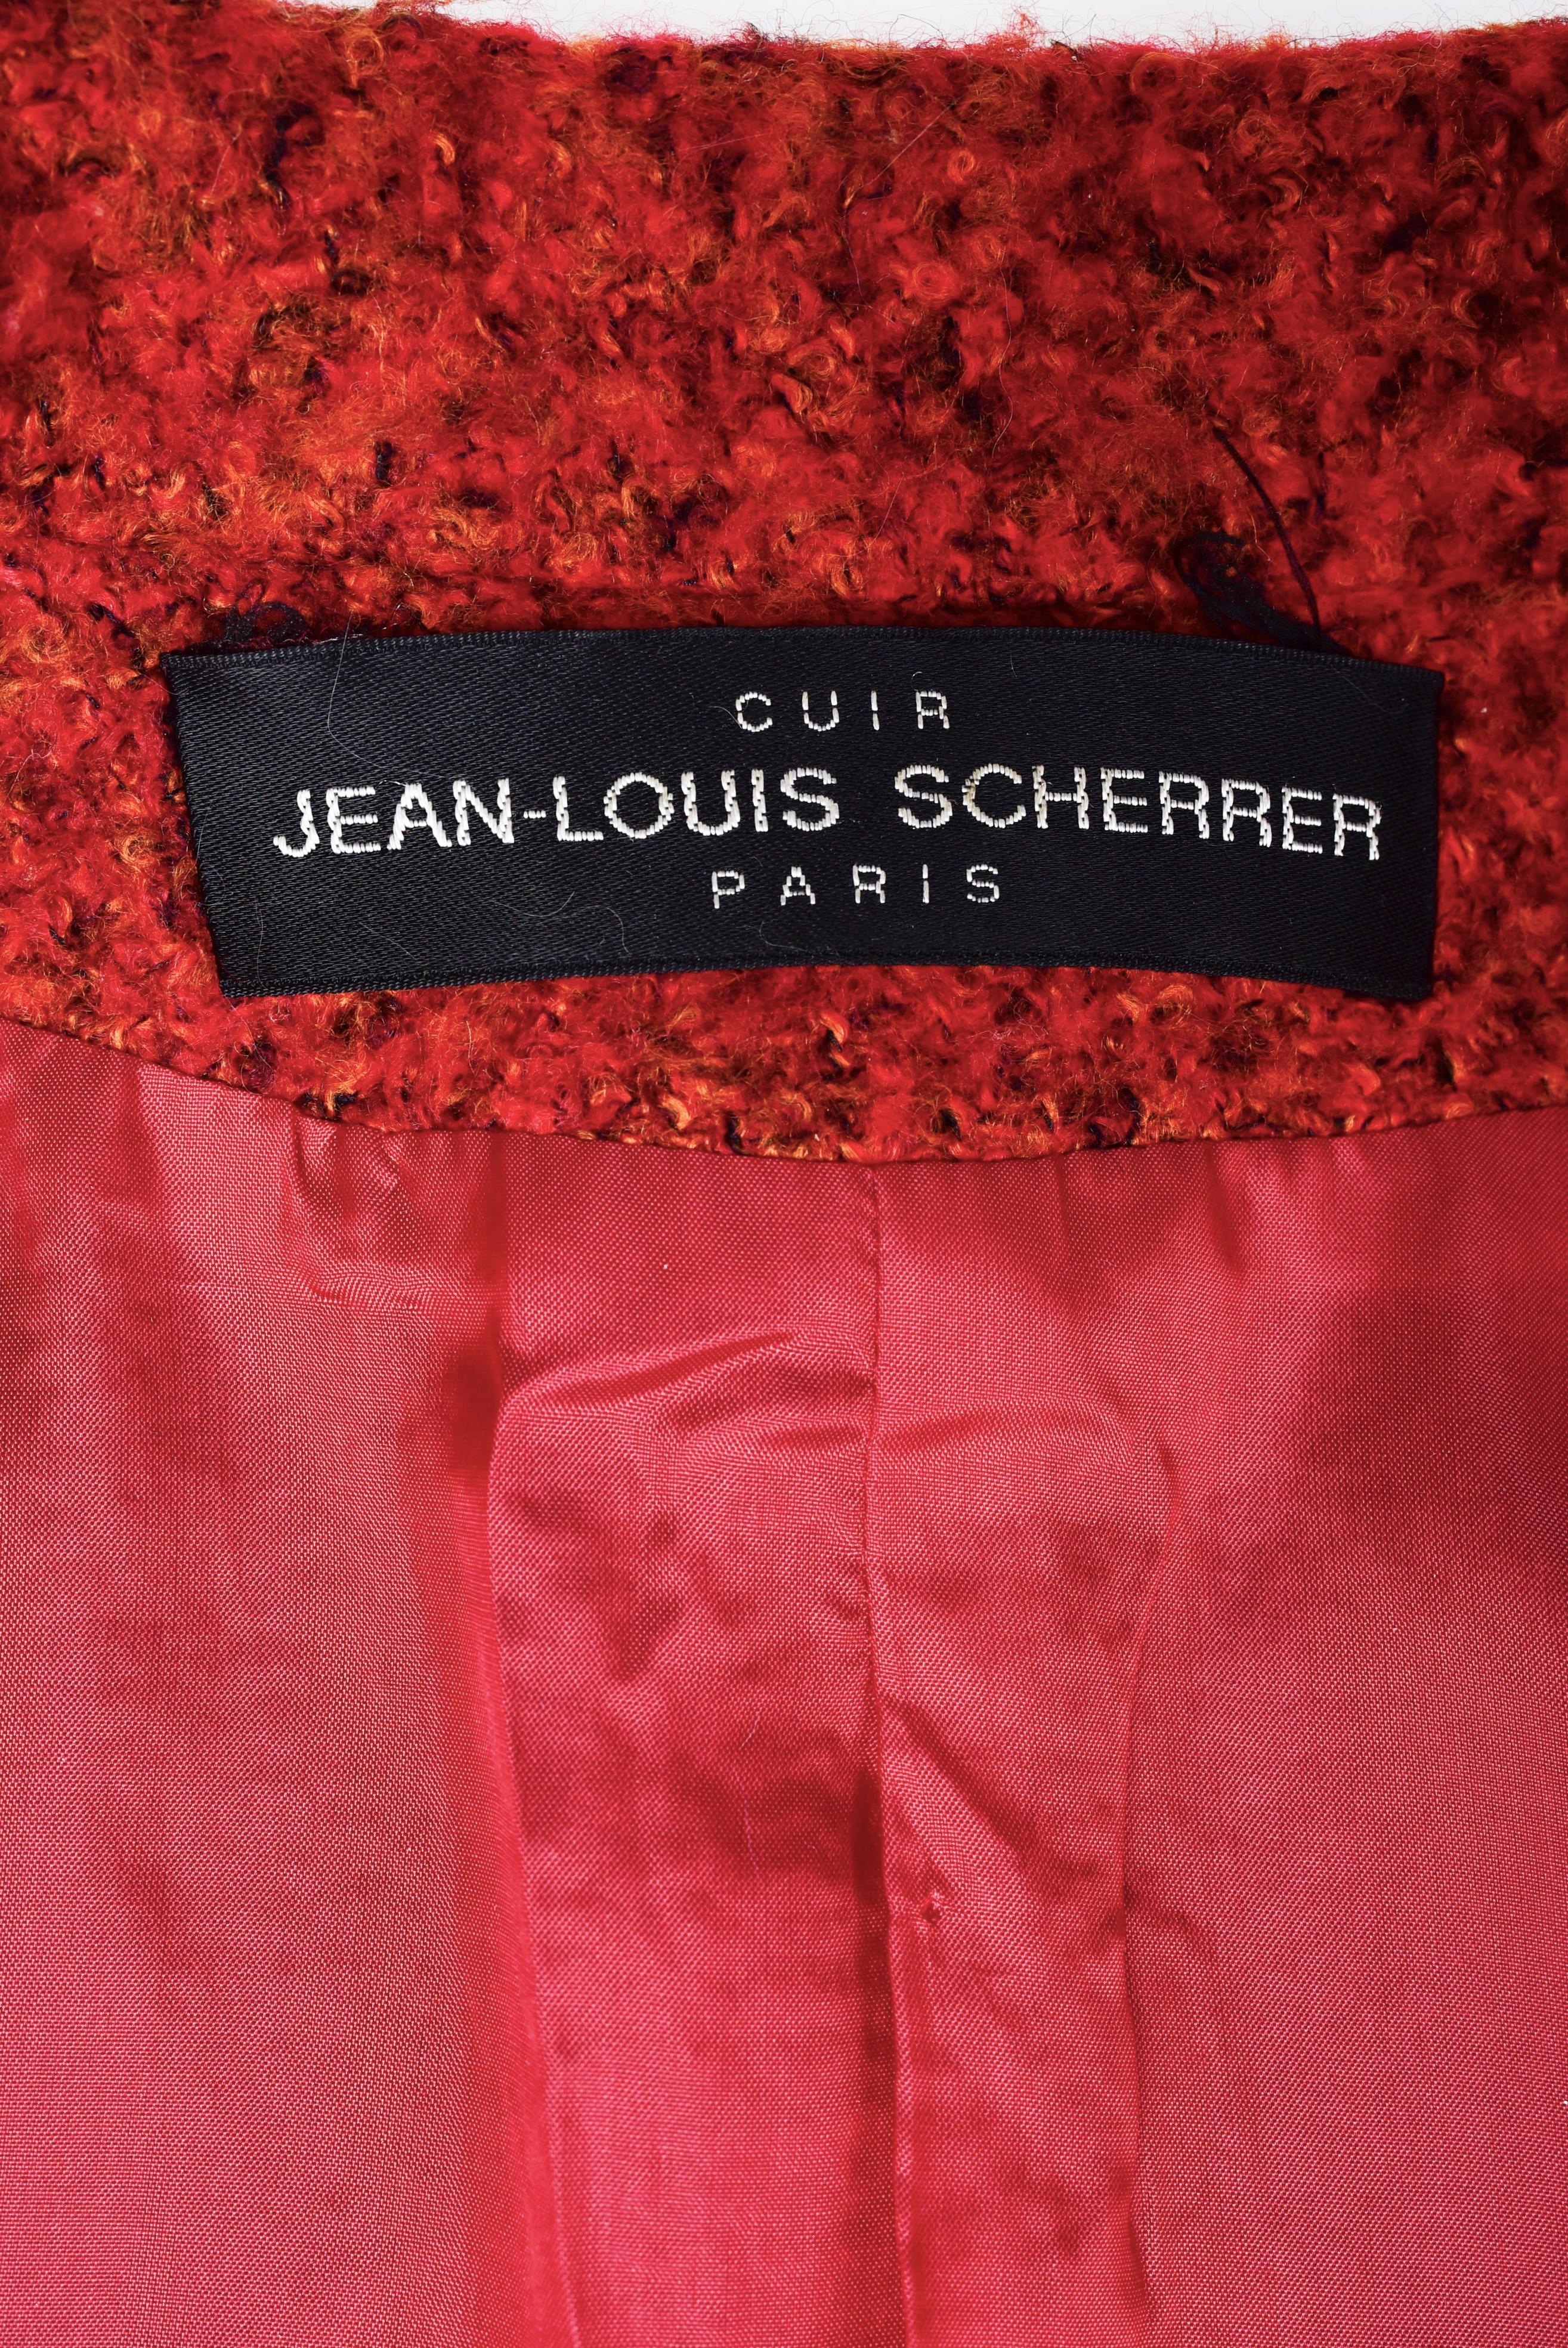 Looped wool and leather jacket by Jean-Louis Sherrer  French Circa 2000 - 2010 In Good Condition For Sale In Toulon, FR